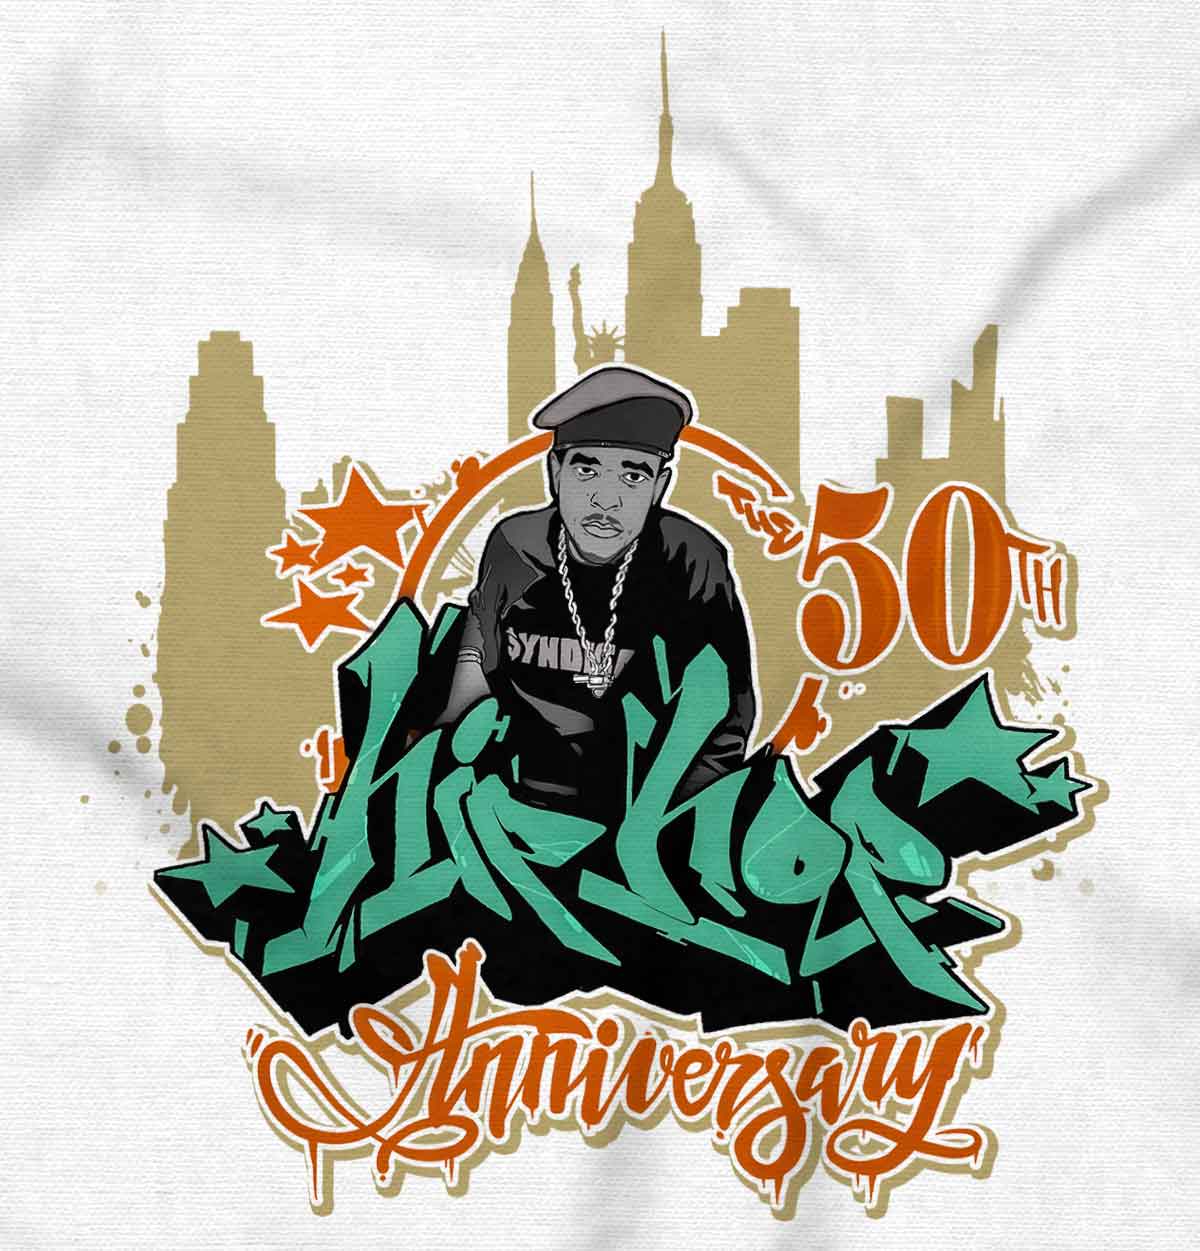 This image represents the essence of Hip Hop, with a cartoonish front shot of Ice-T. It is a tribute to the 50th anniversary of this influential movement. Join us in expressing your love and appreciation for Hip Hop.